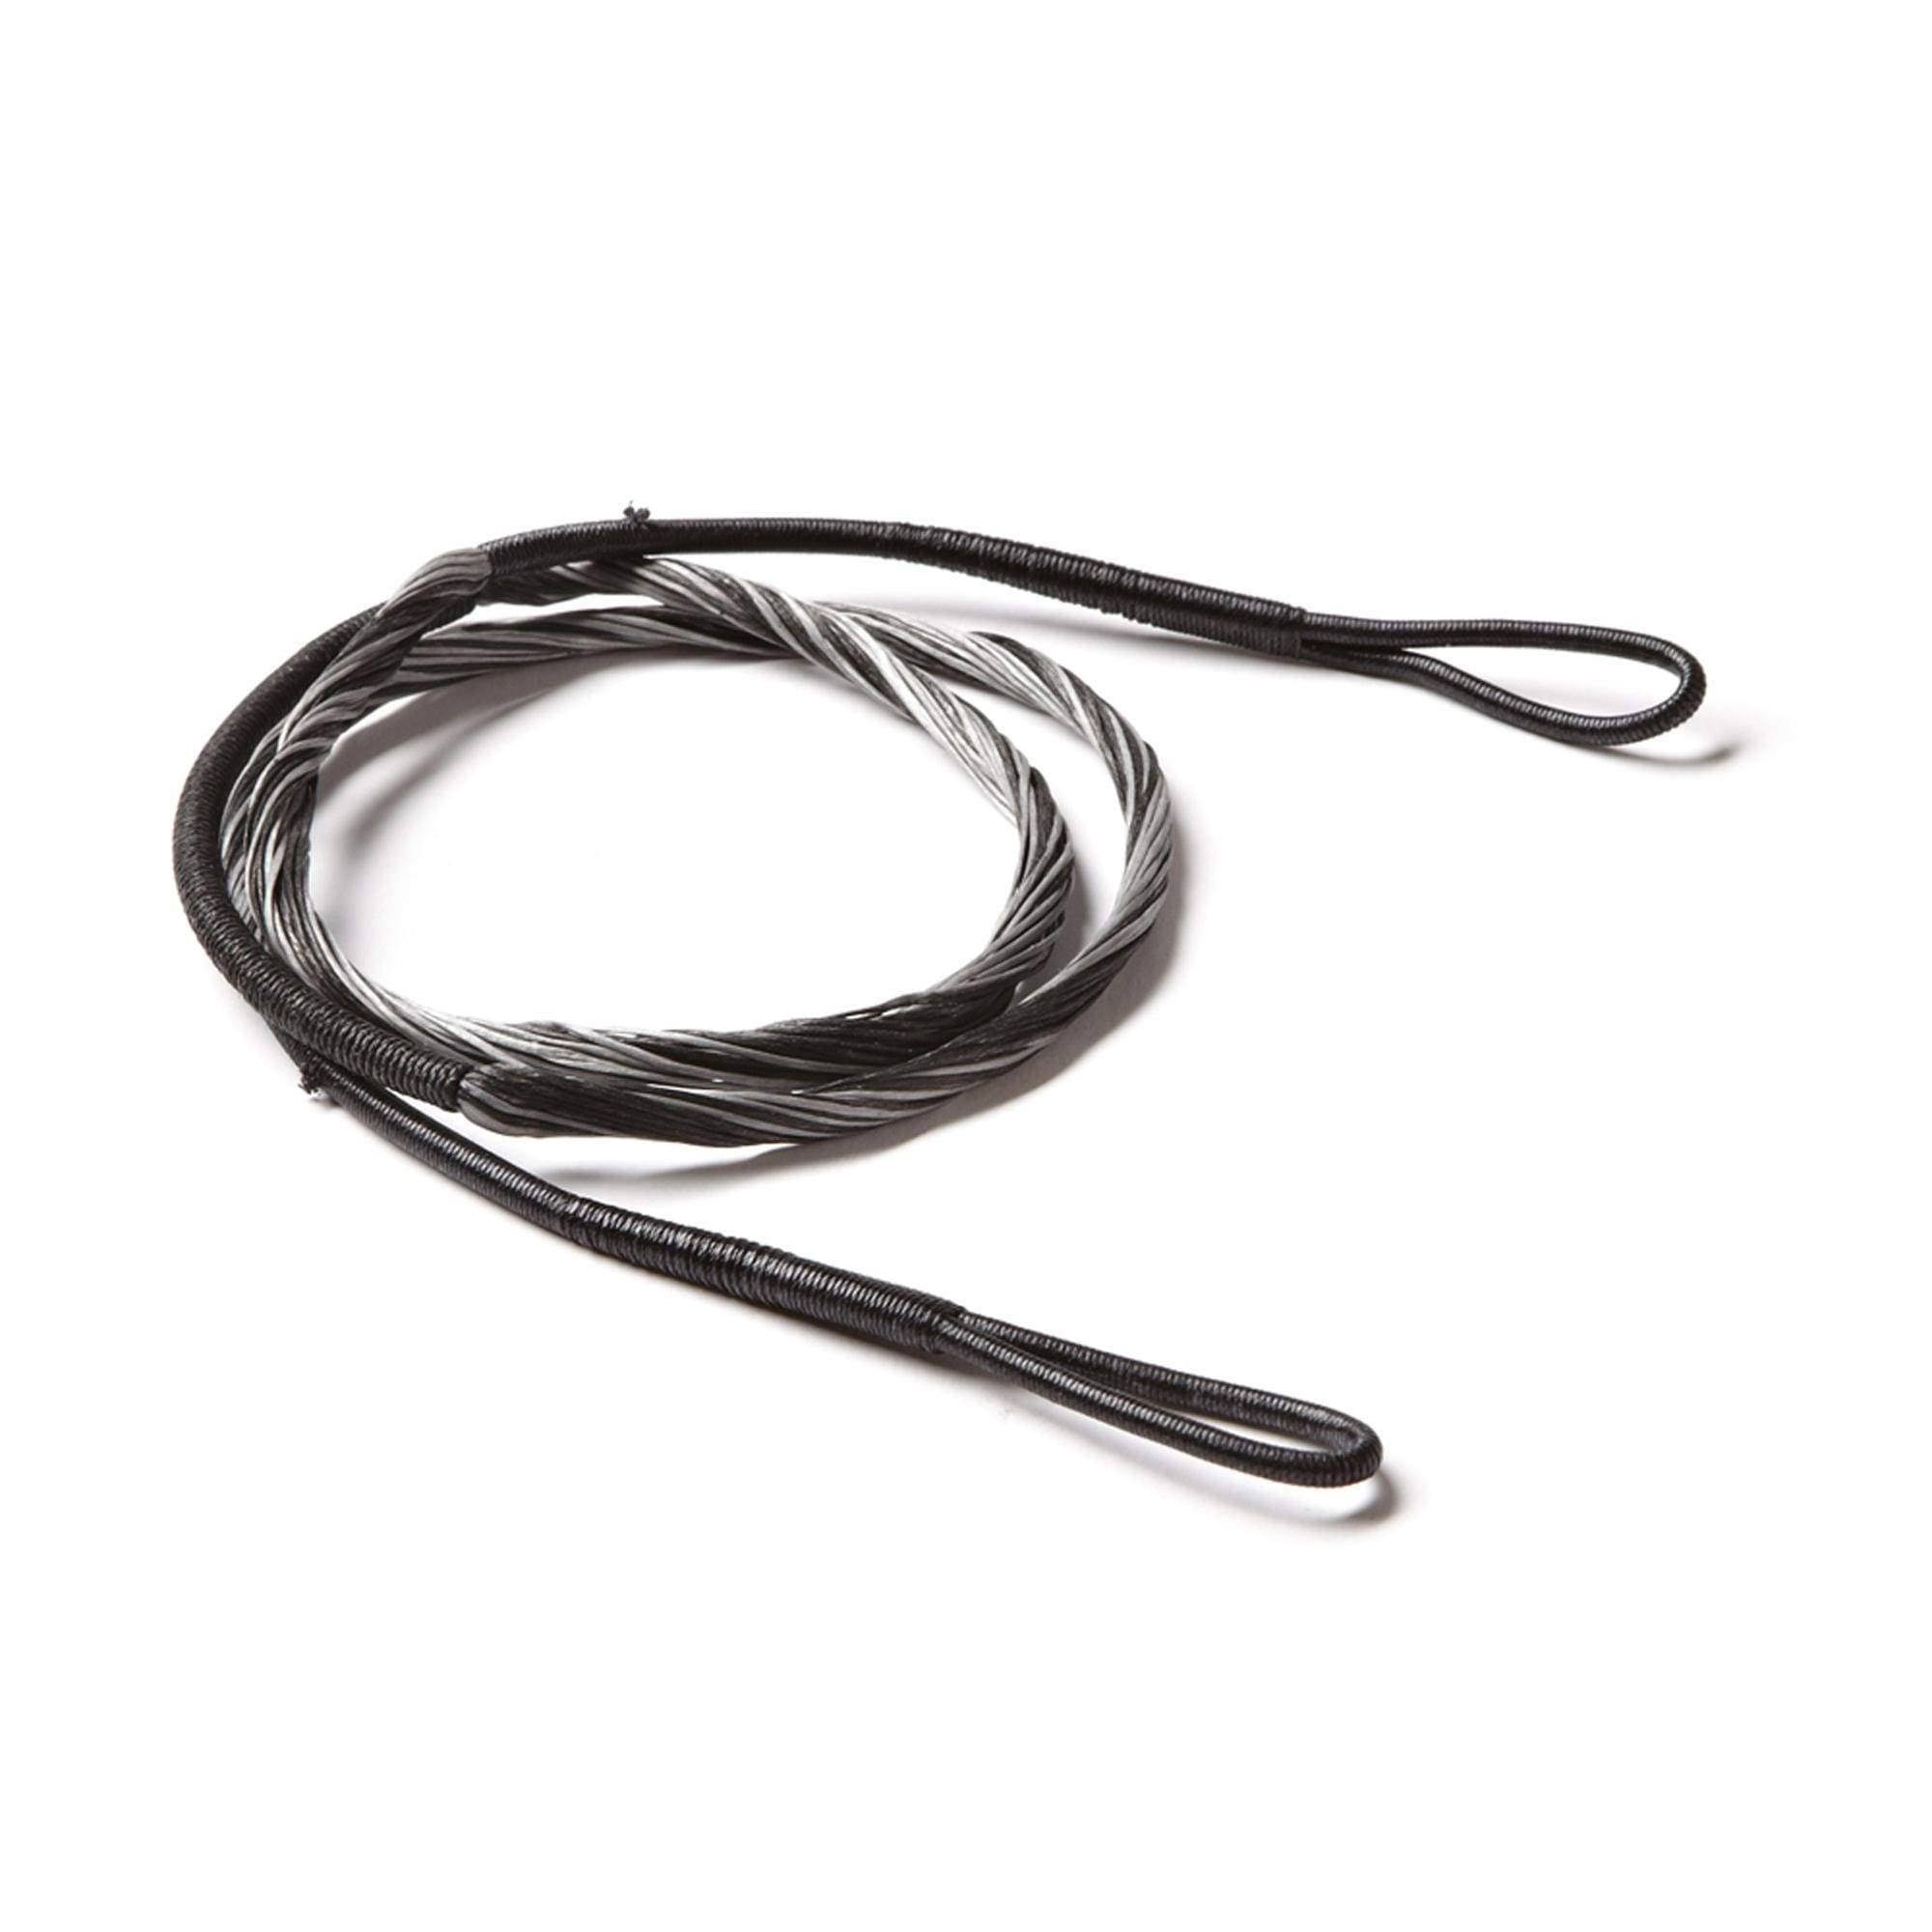 Excalibur Crossbow Micro Replacement String - Black